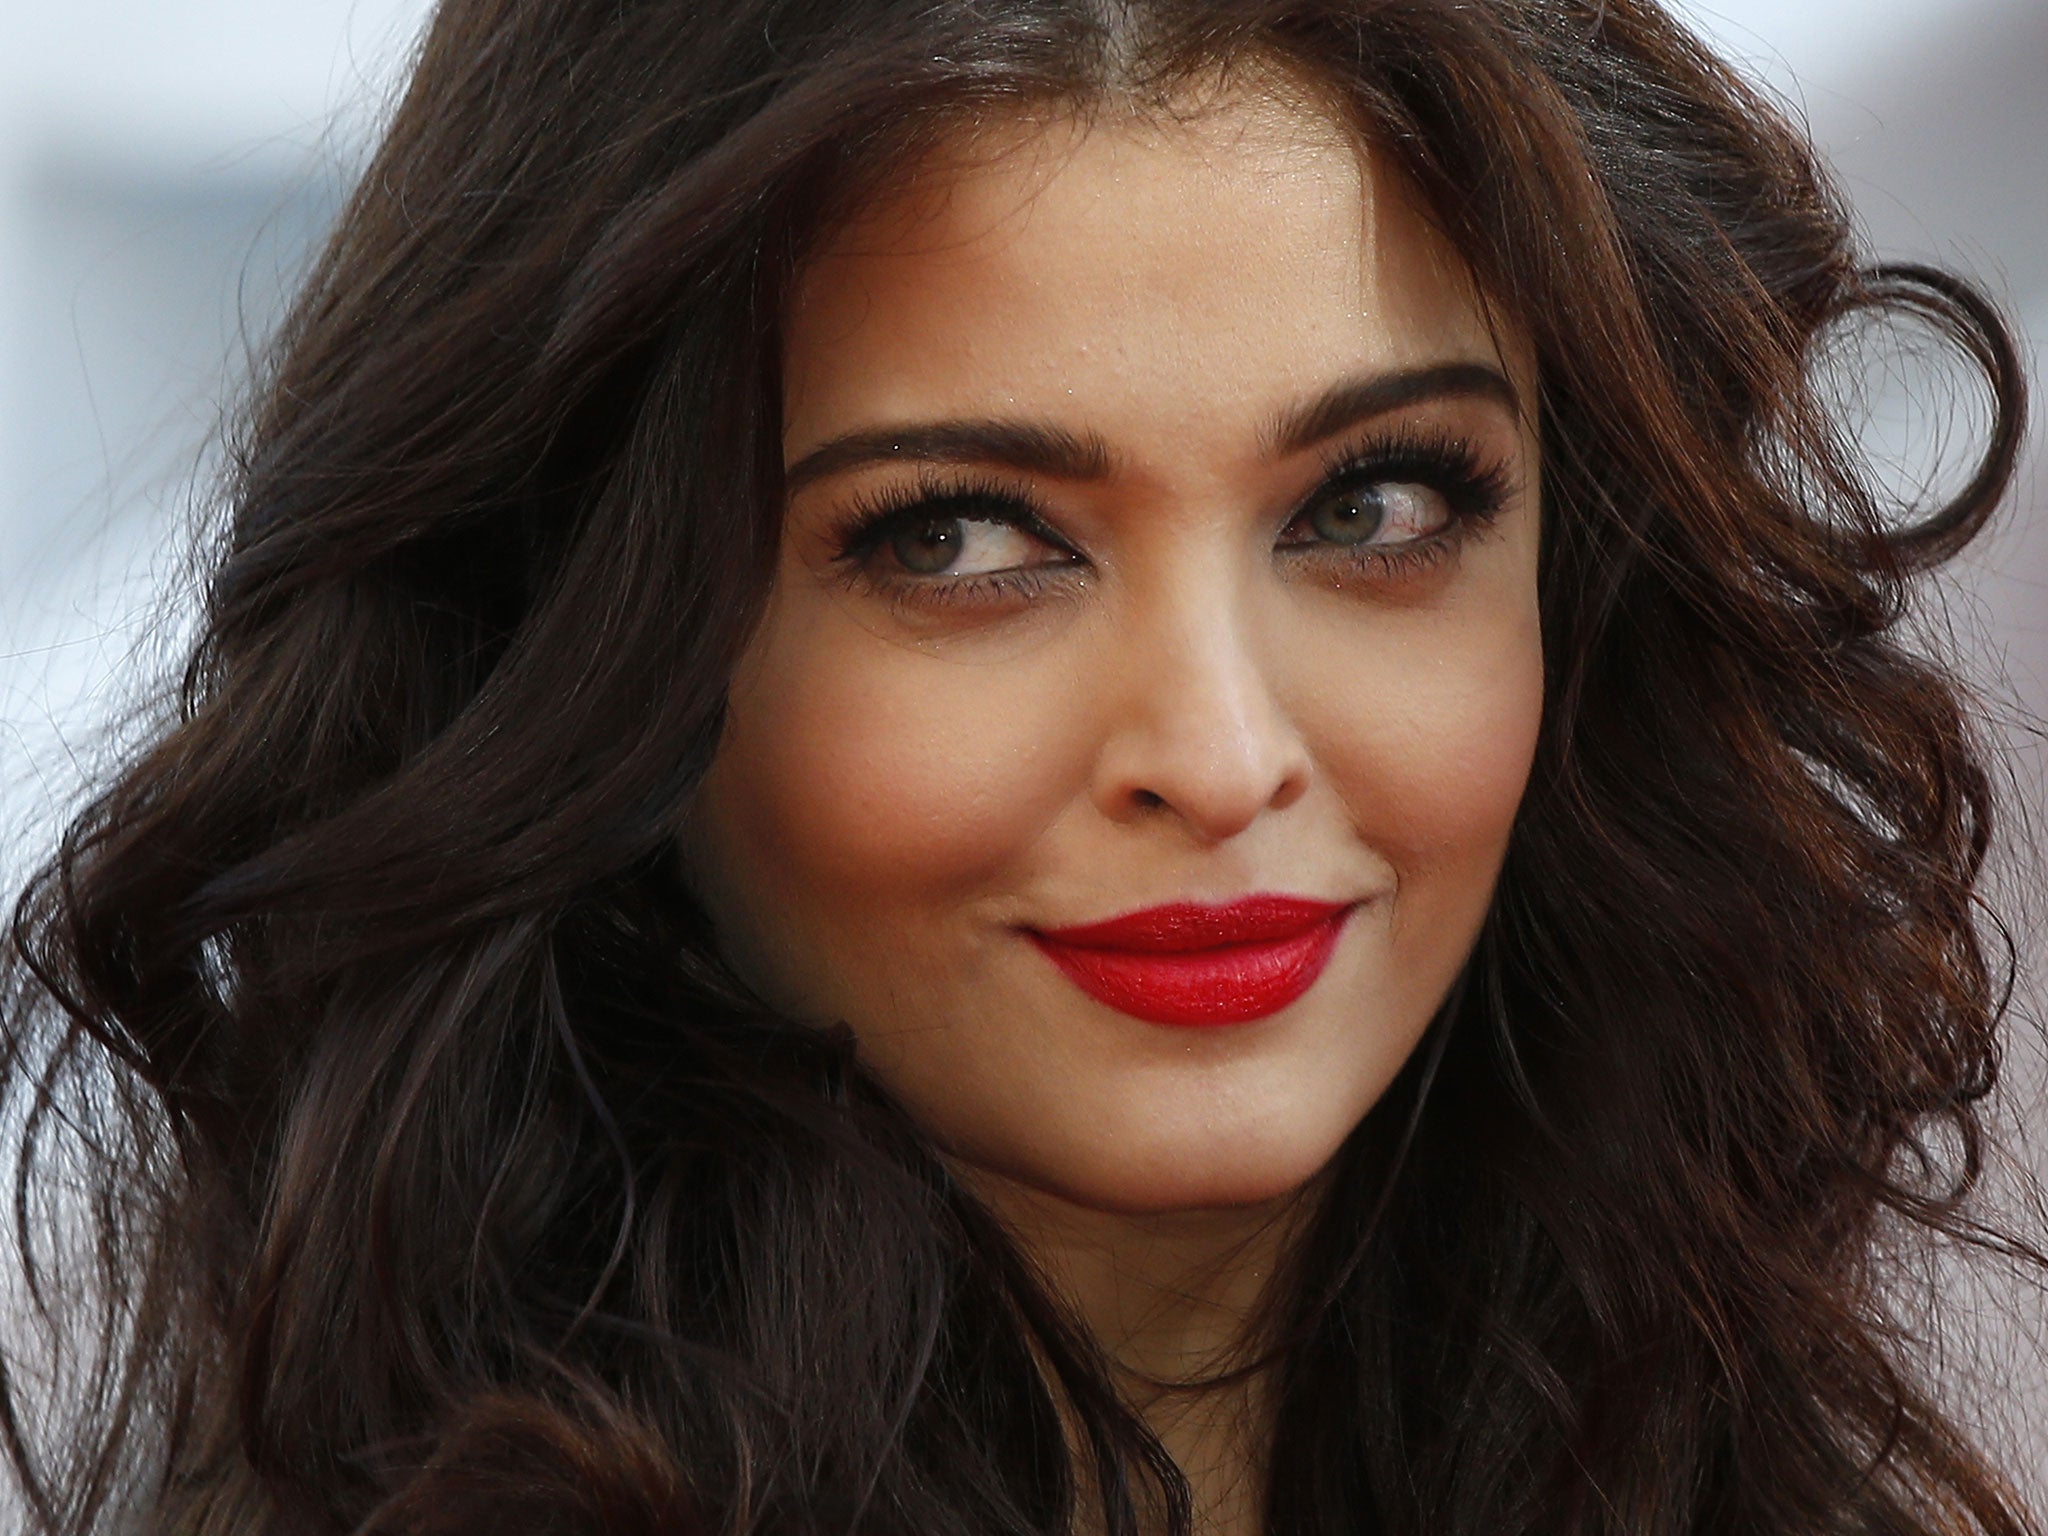 Aishwarya Rai Bachan Sex - Aishwarya Rai Bachchan 'racist' jewellery advert pulled after criticism it  promoted child slavery | The Independent | The Independent